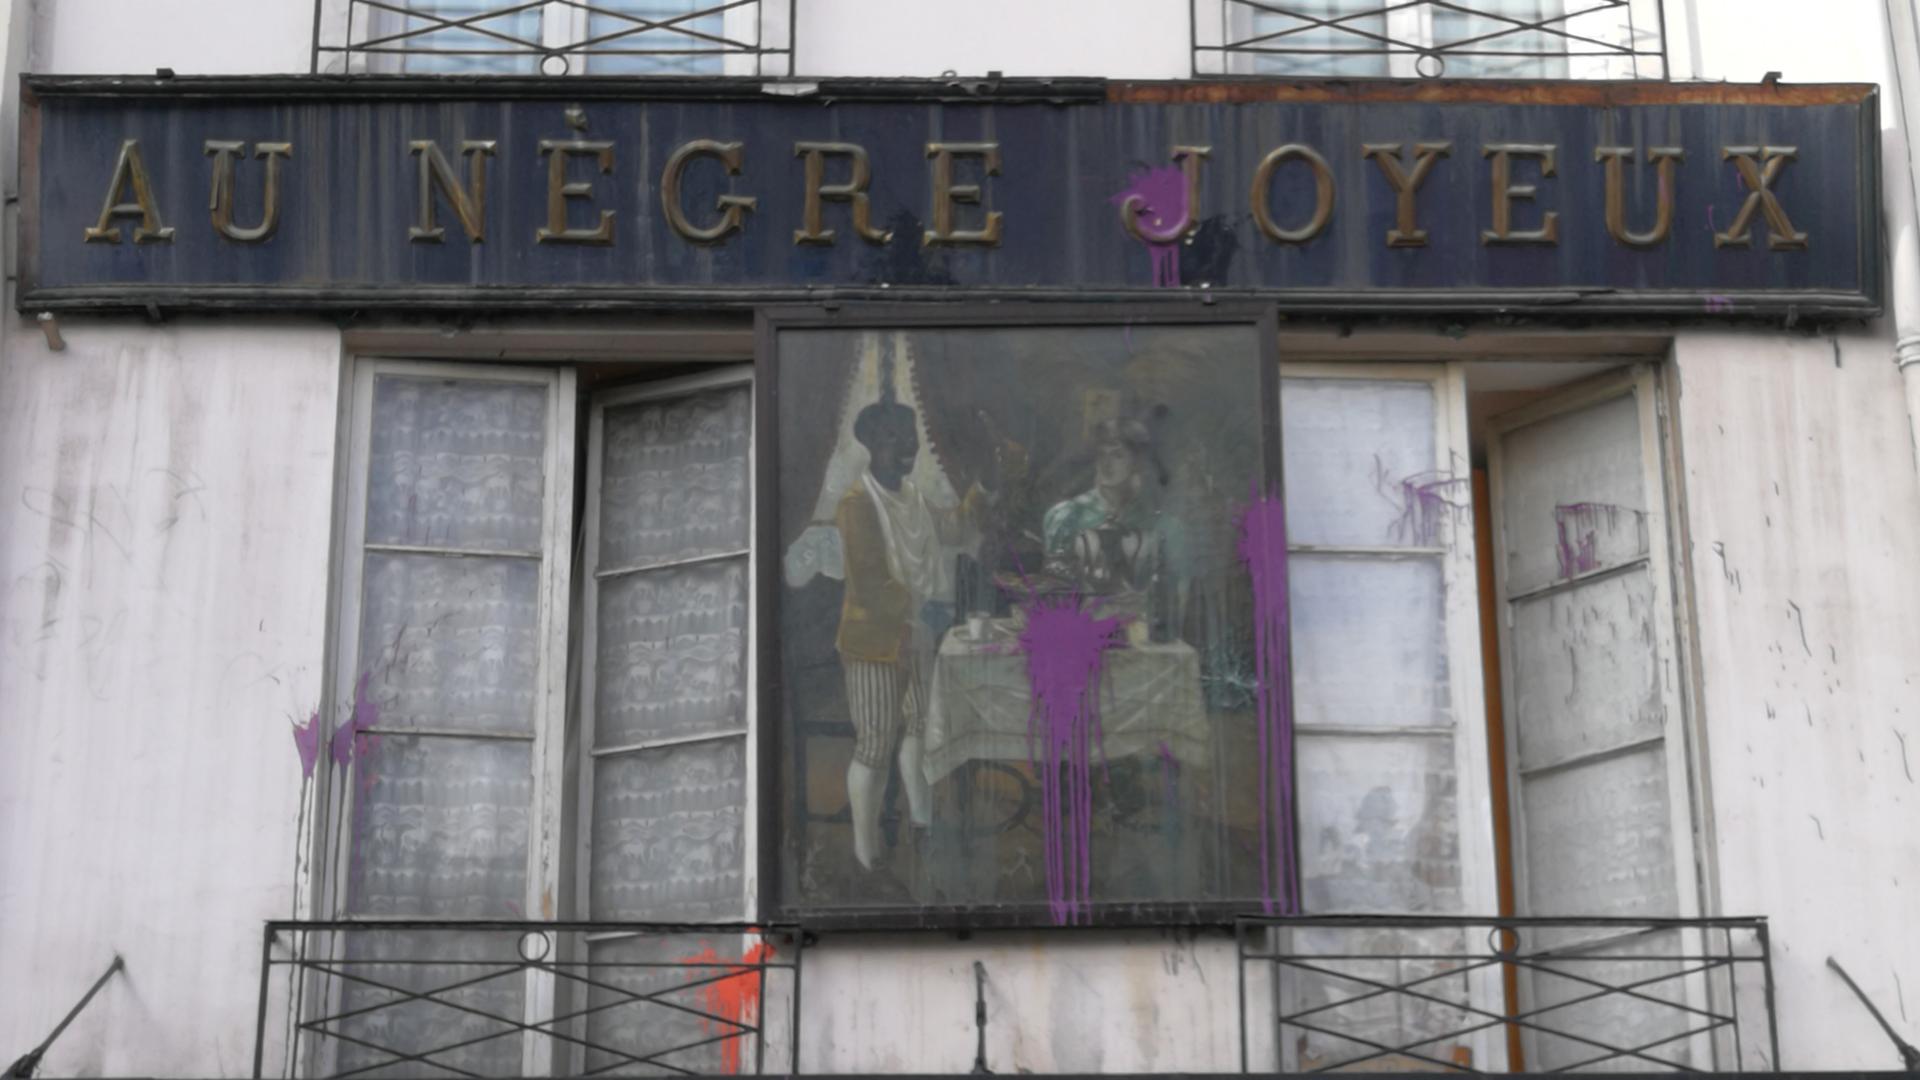 This 19th century sign, which was originally above a grocery shop in Paris, has been defaced several times in recent years. The Paris City Council has voted to take it down.